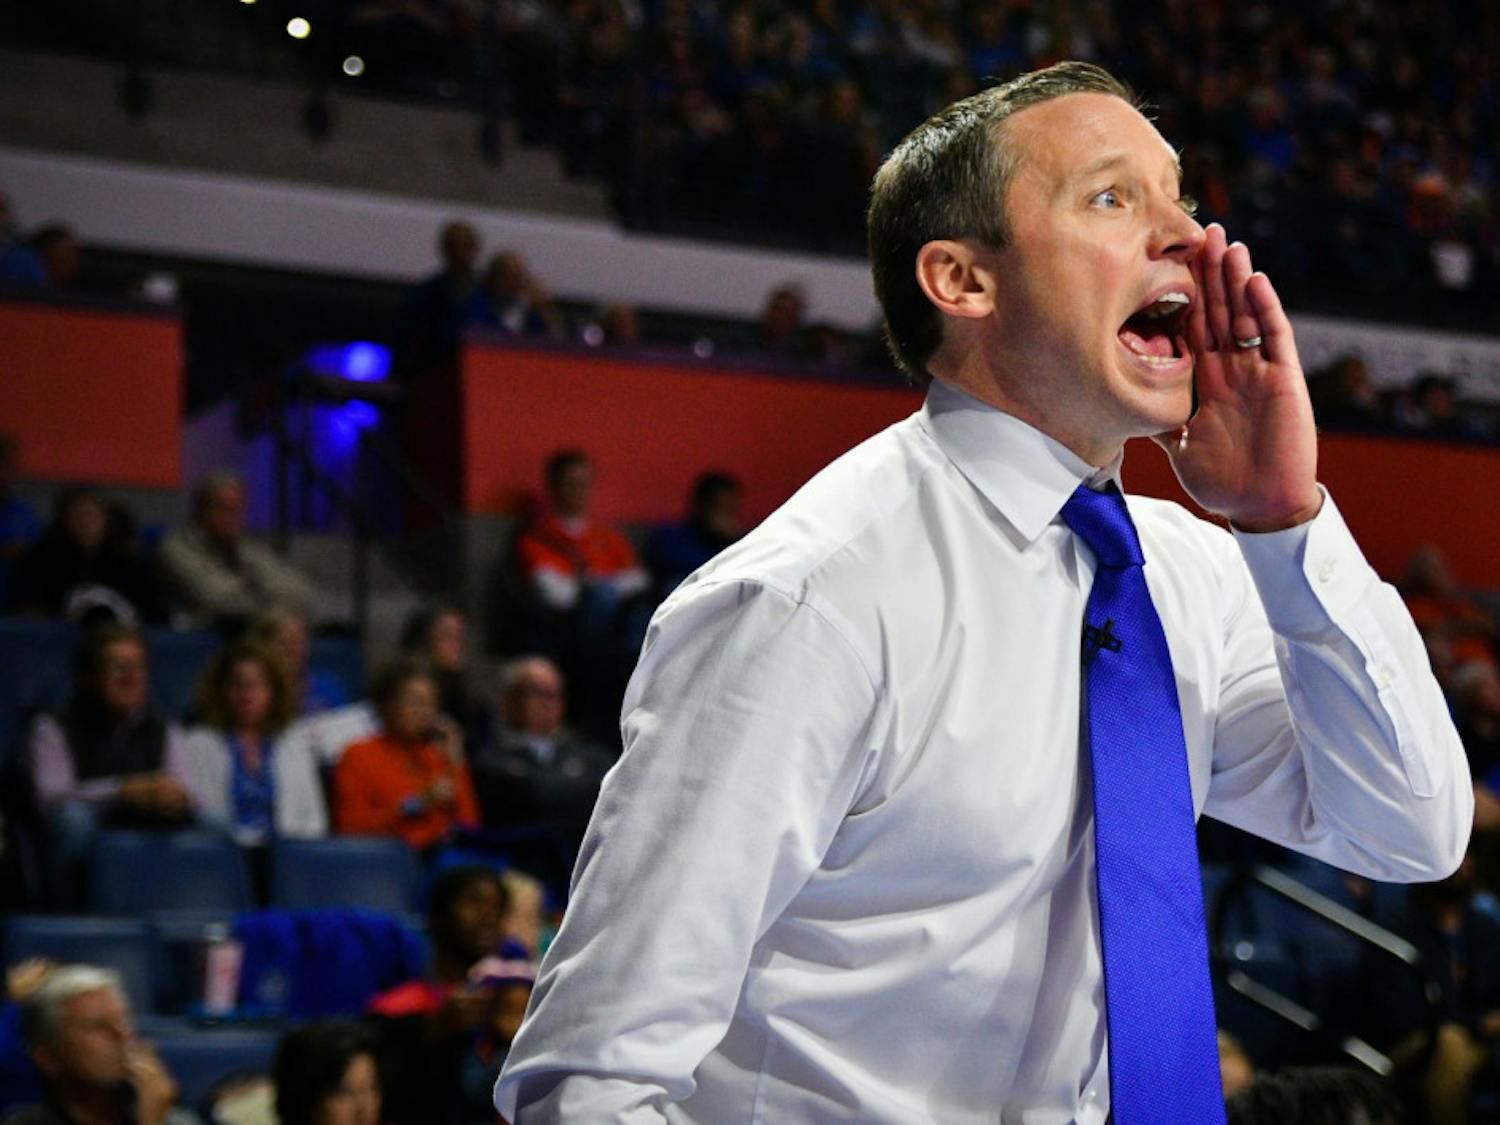 Florida men's basketball coach Mike White and the Gators play Vanderbilt at 9 p.m. on Wednesday at the O'Connell Center. The Commodores are looking to pick up their first SEC win of the season.
&nbsp;